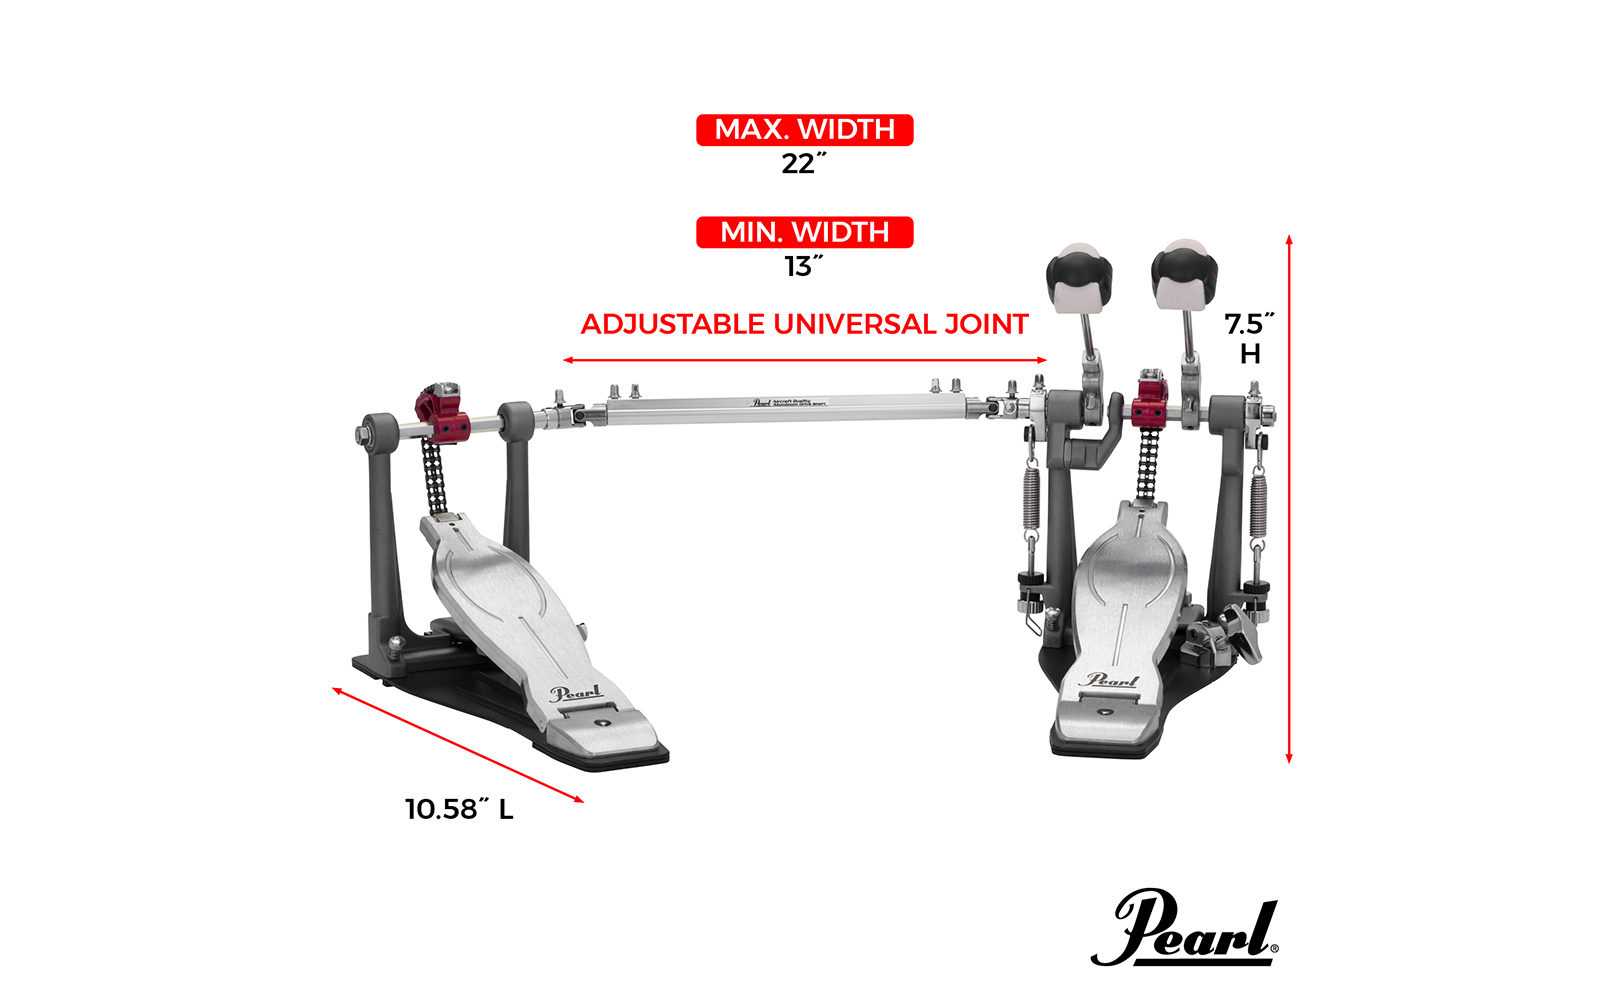 P-1032R Red Double Pedal | パール楽器【公式サイト】Pearl Drums